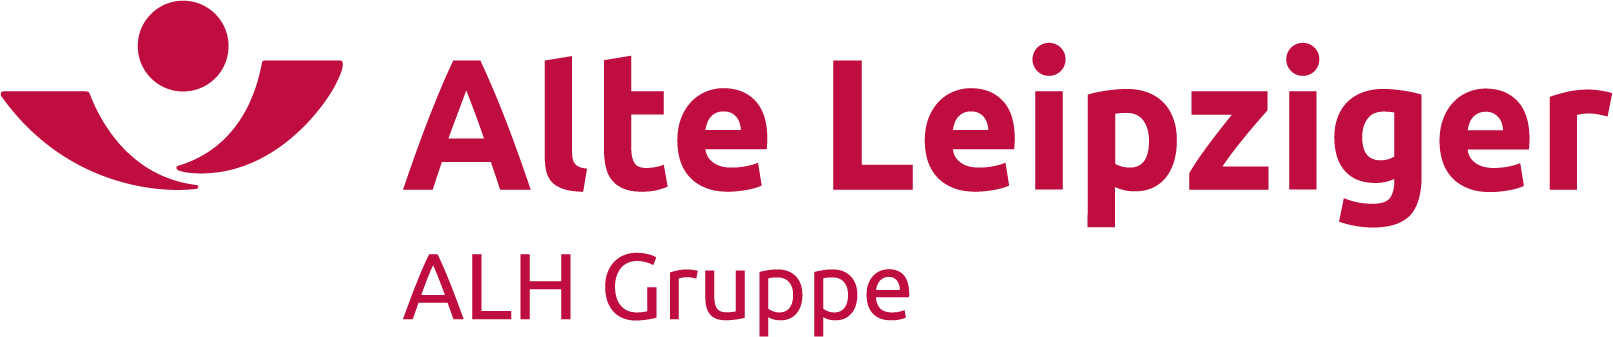 ALH_Alte-Leipziger-Endorsement_rot_RGB_png